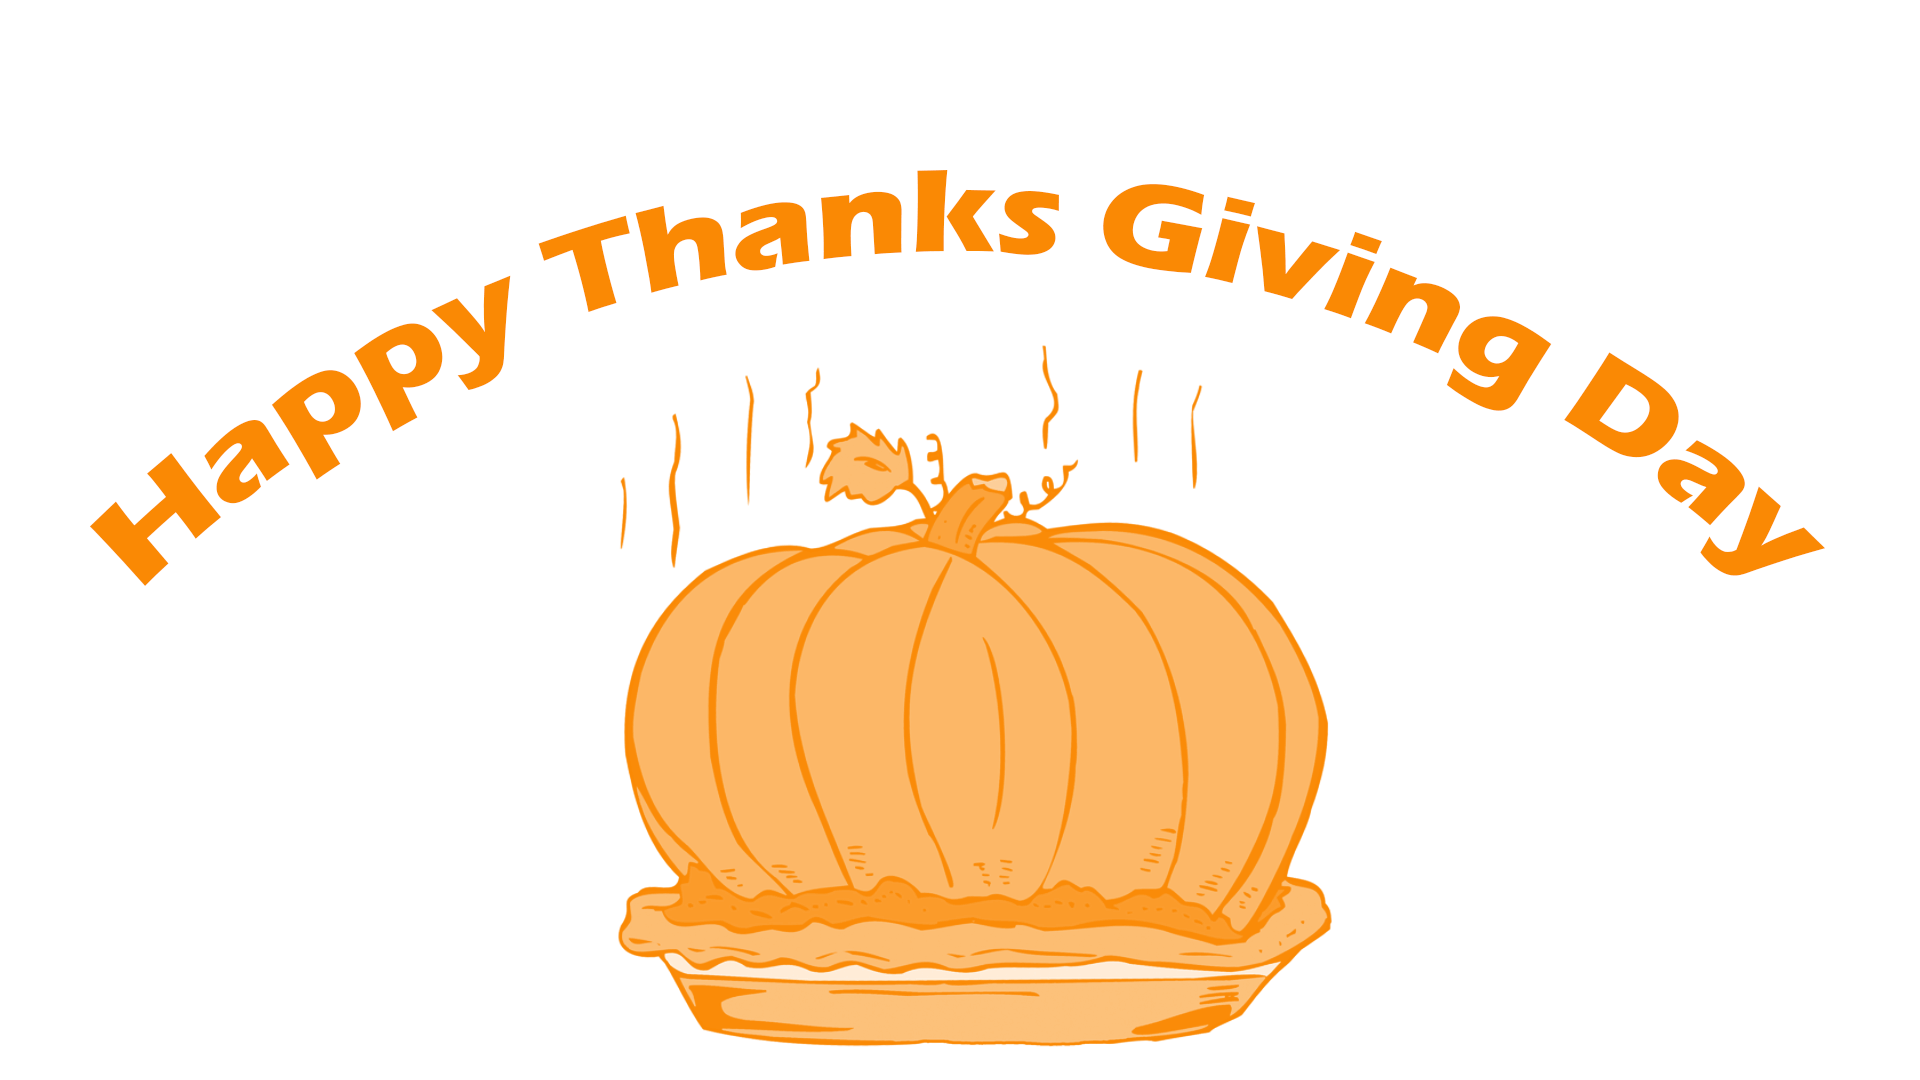 Happy Thanksgiving GIFs - 35 Animated Greeting Cards